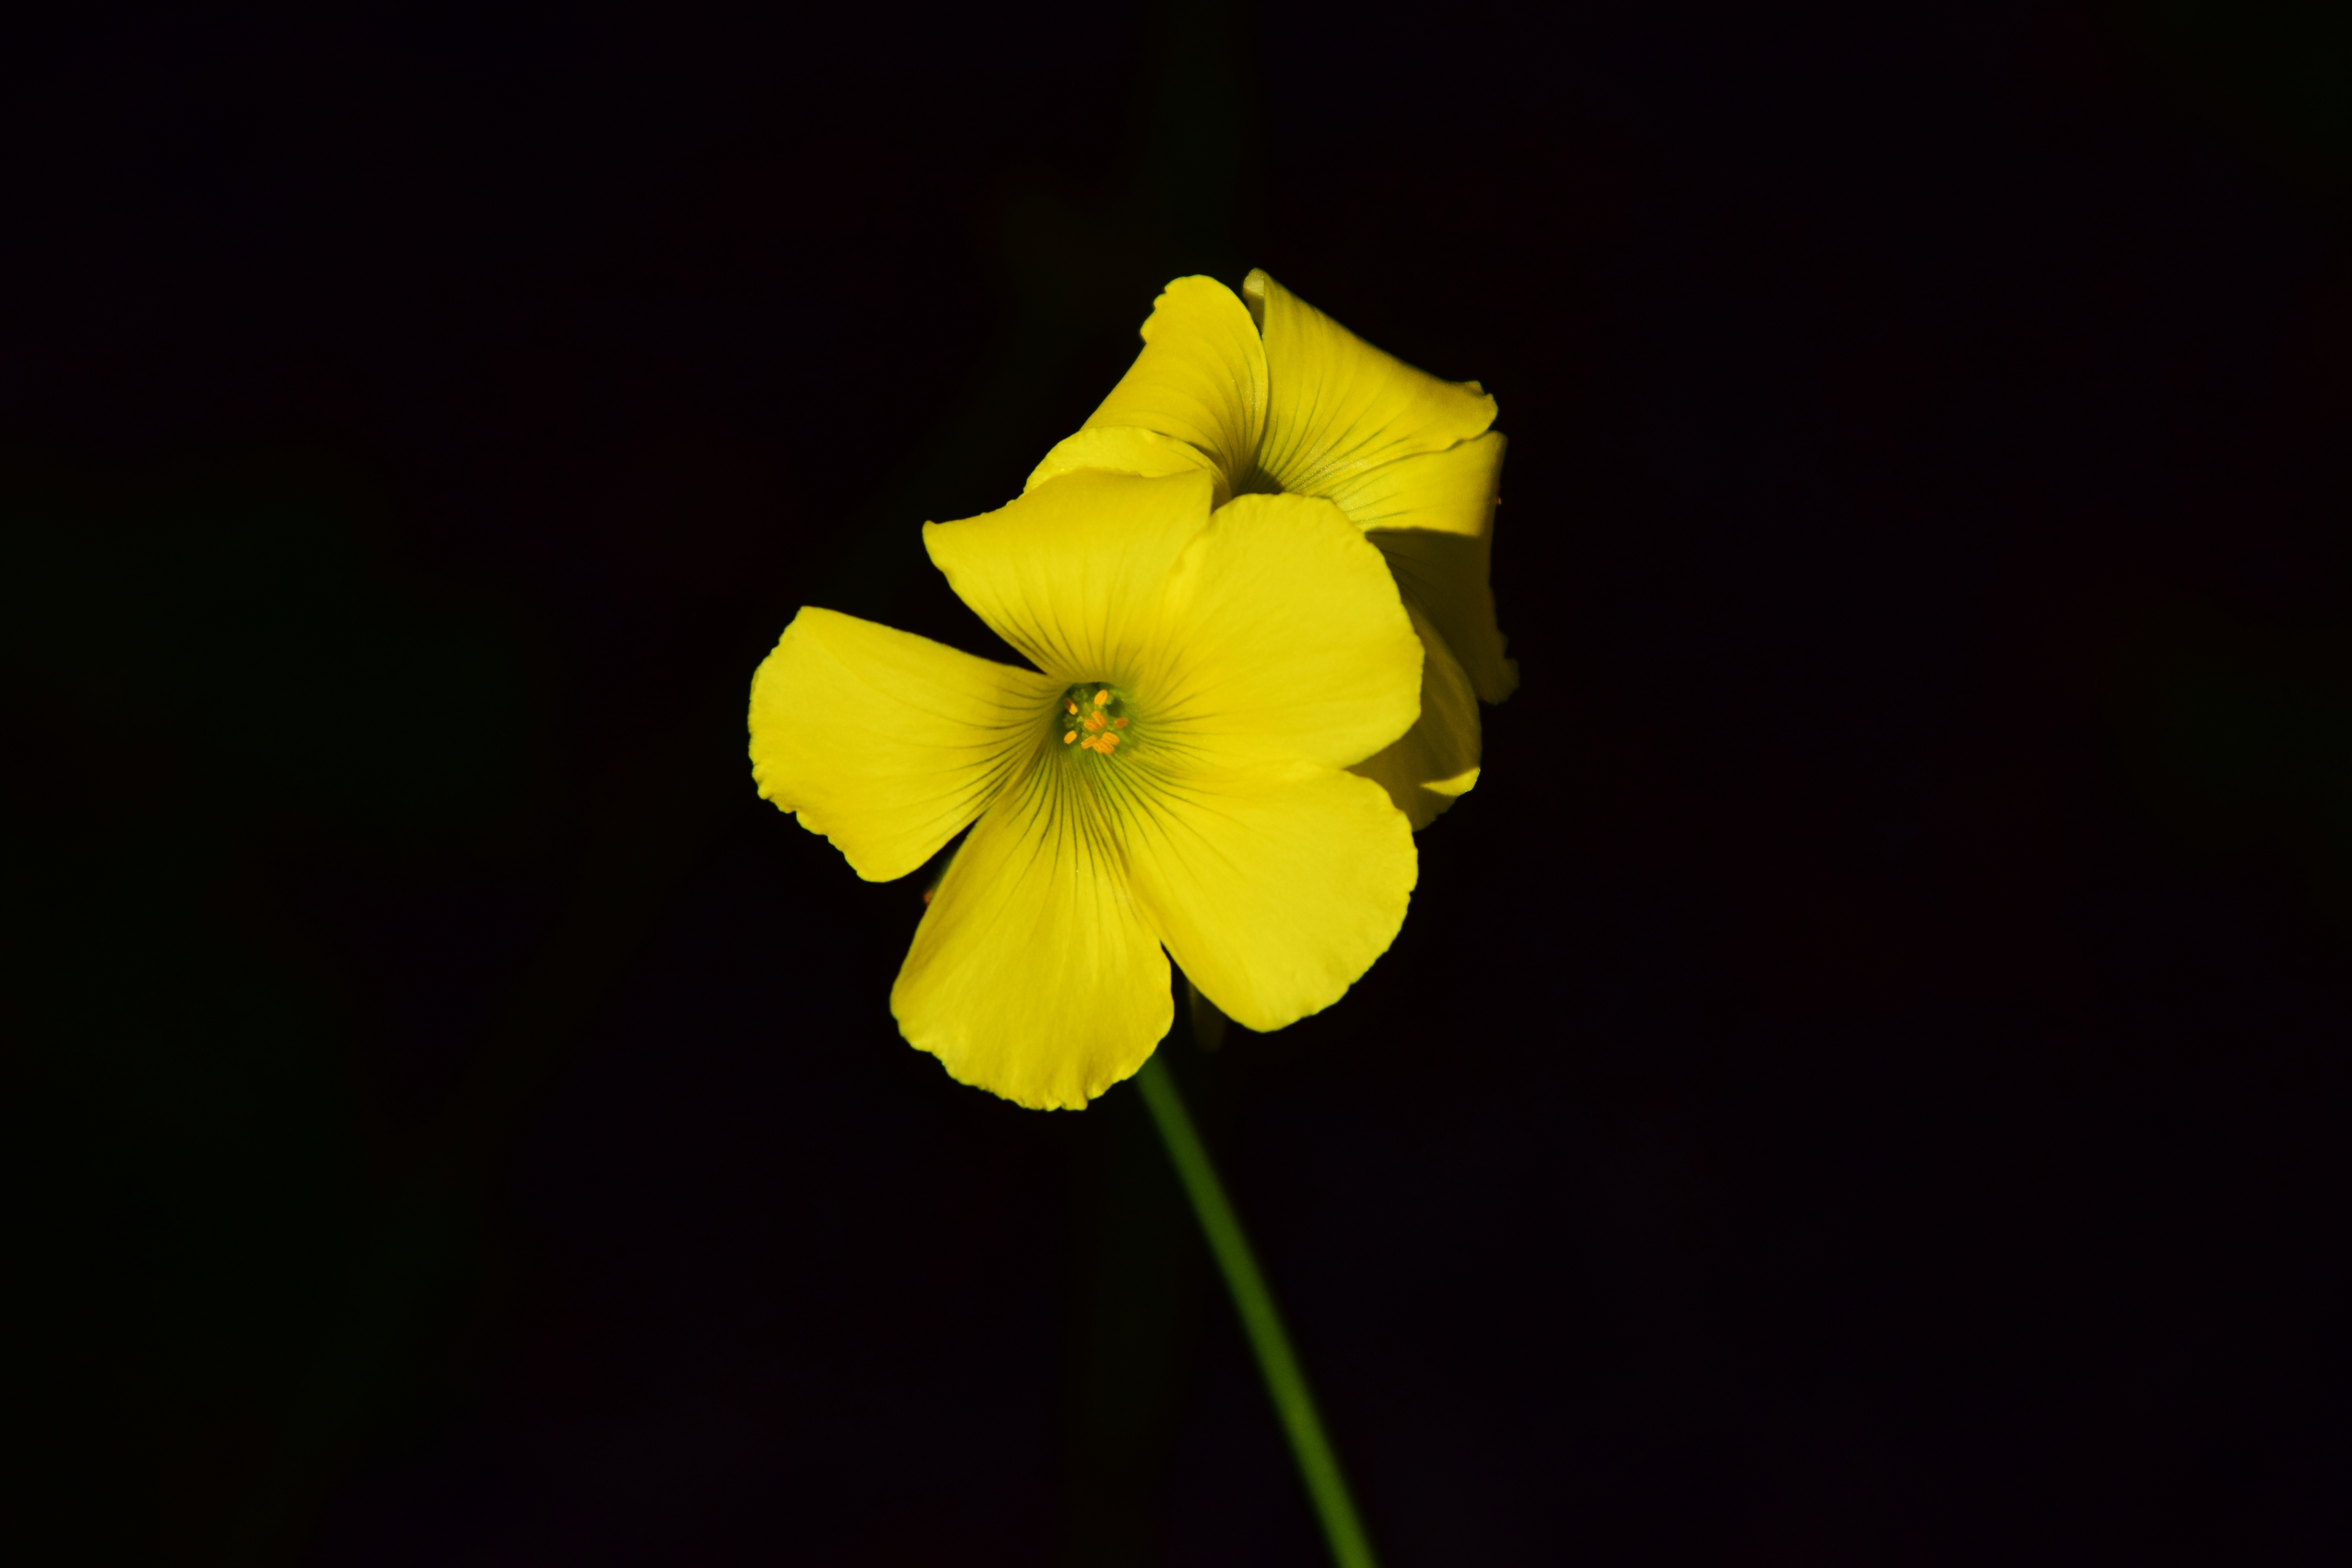 77017 download wallpaper black background, yellow, flower, macro, close-up, small, contrast, oxalis screensavers and pictures for free